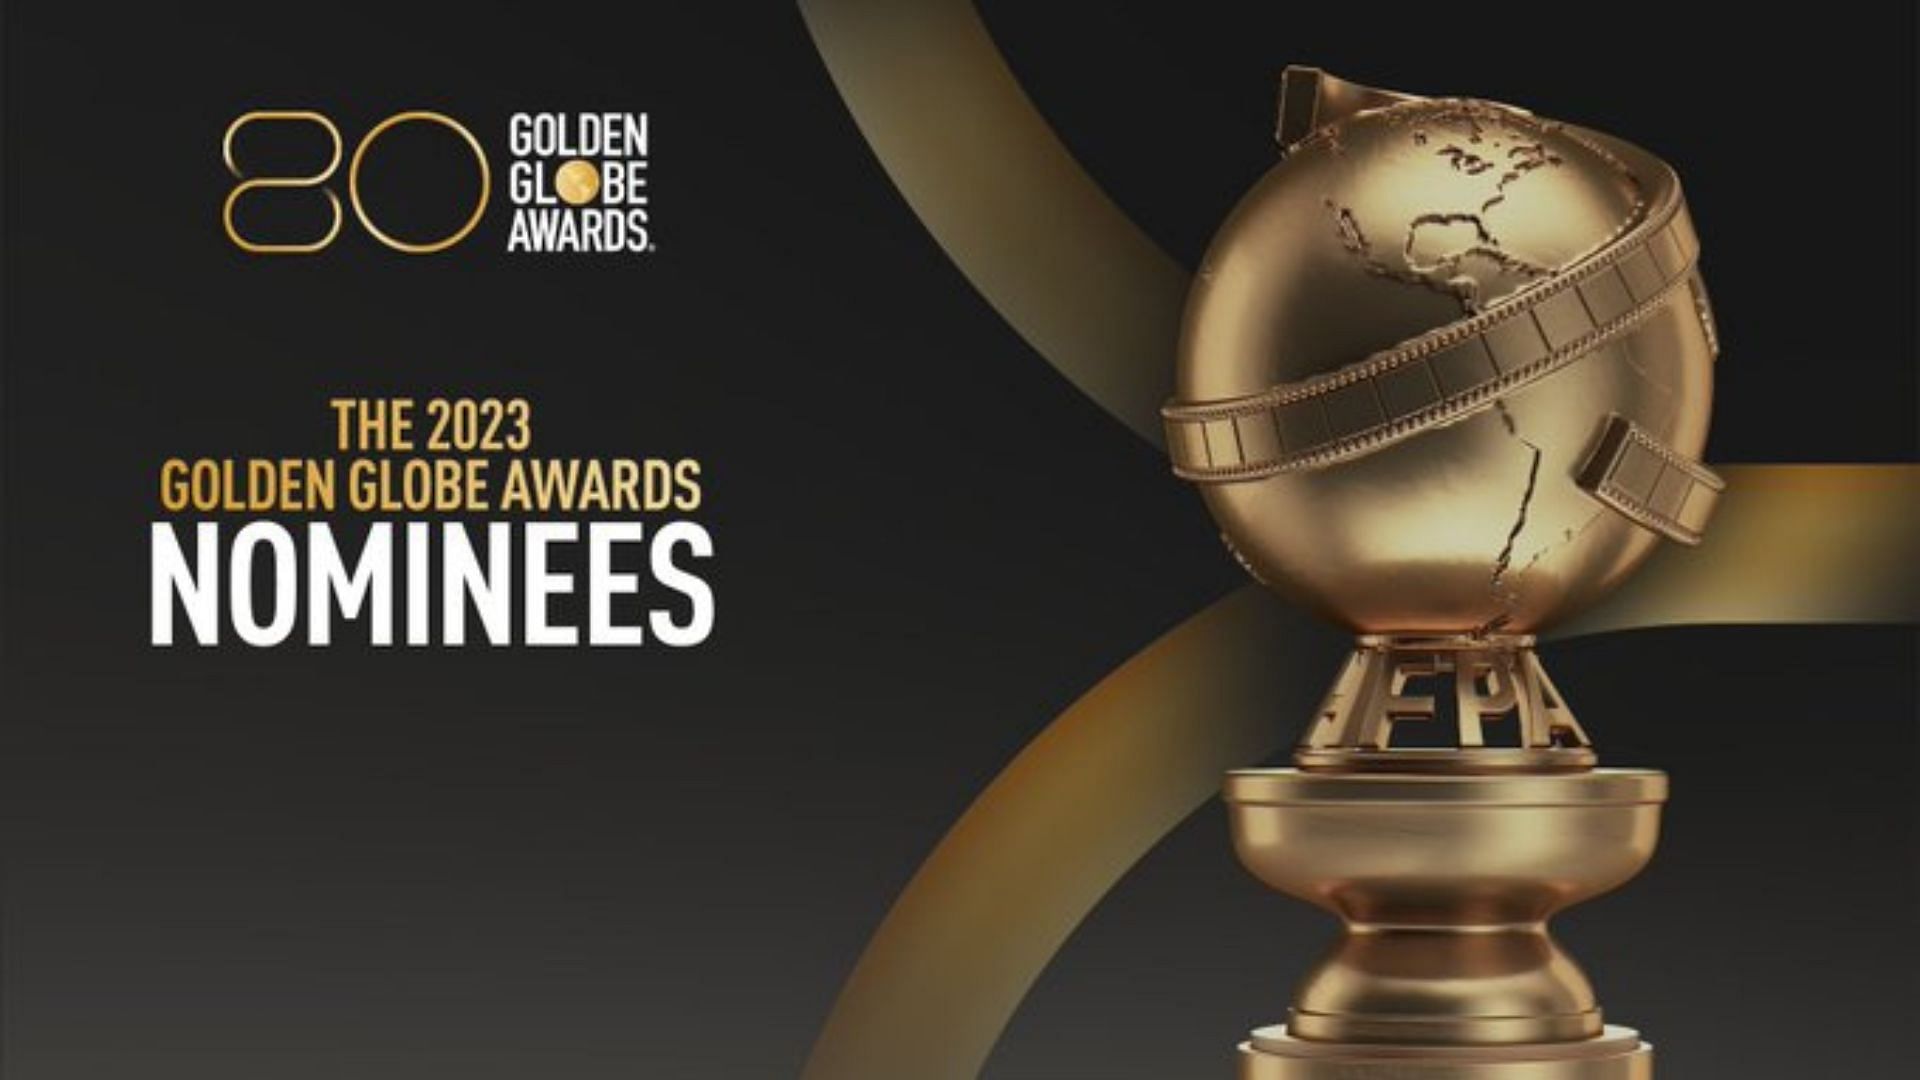 80th Golden Globe Awards 2023 How to watch and what time?